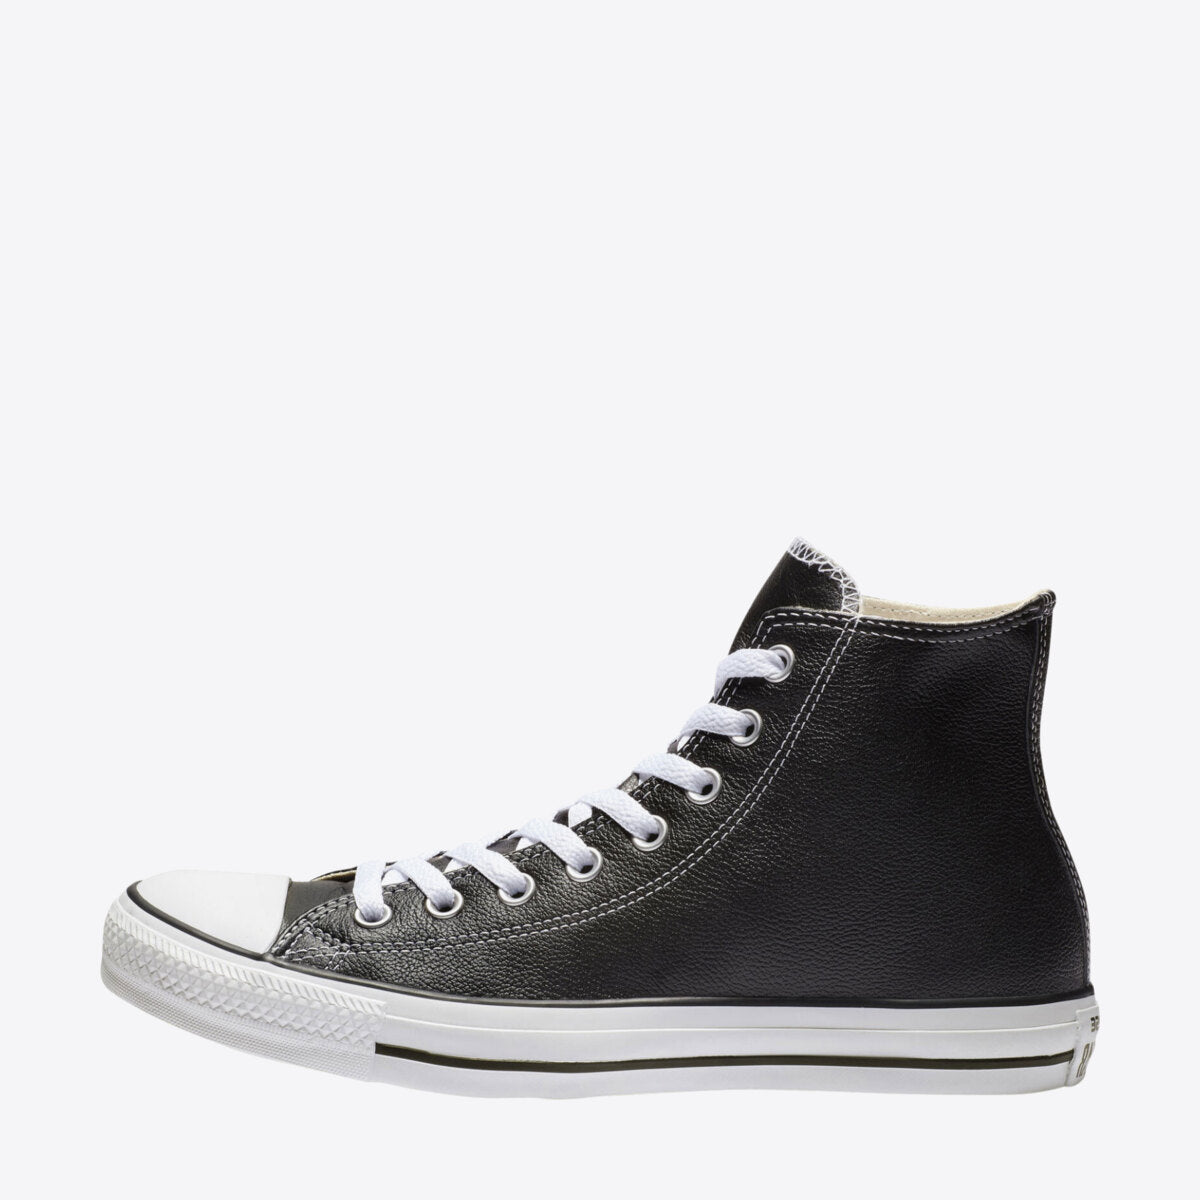 CONVERSE Chuck Taylor All Star Leather High Black - Image 8